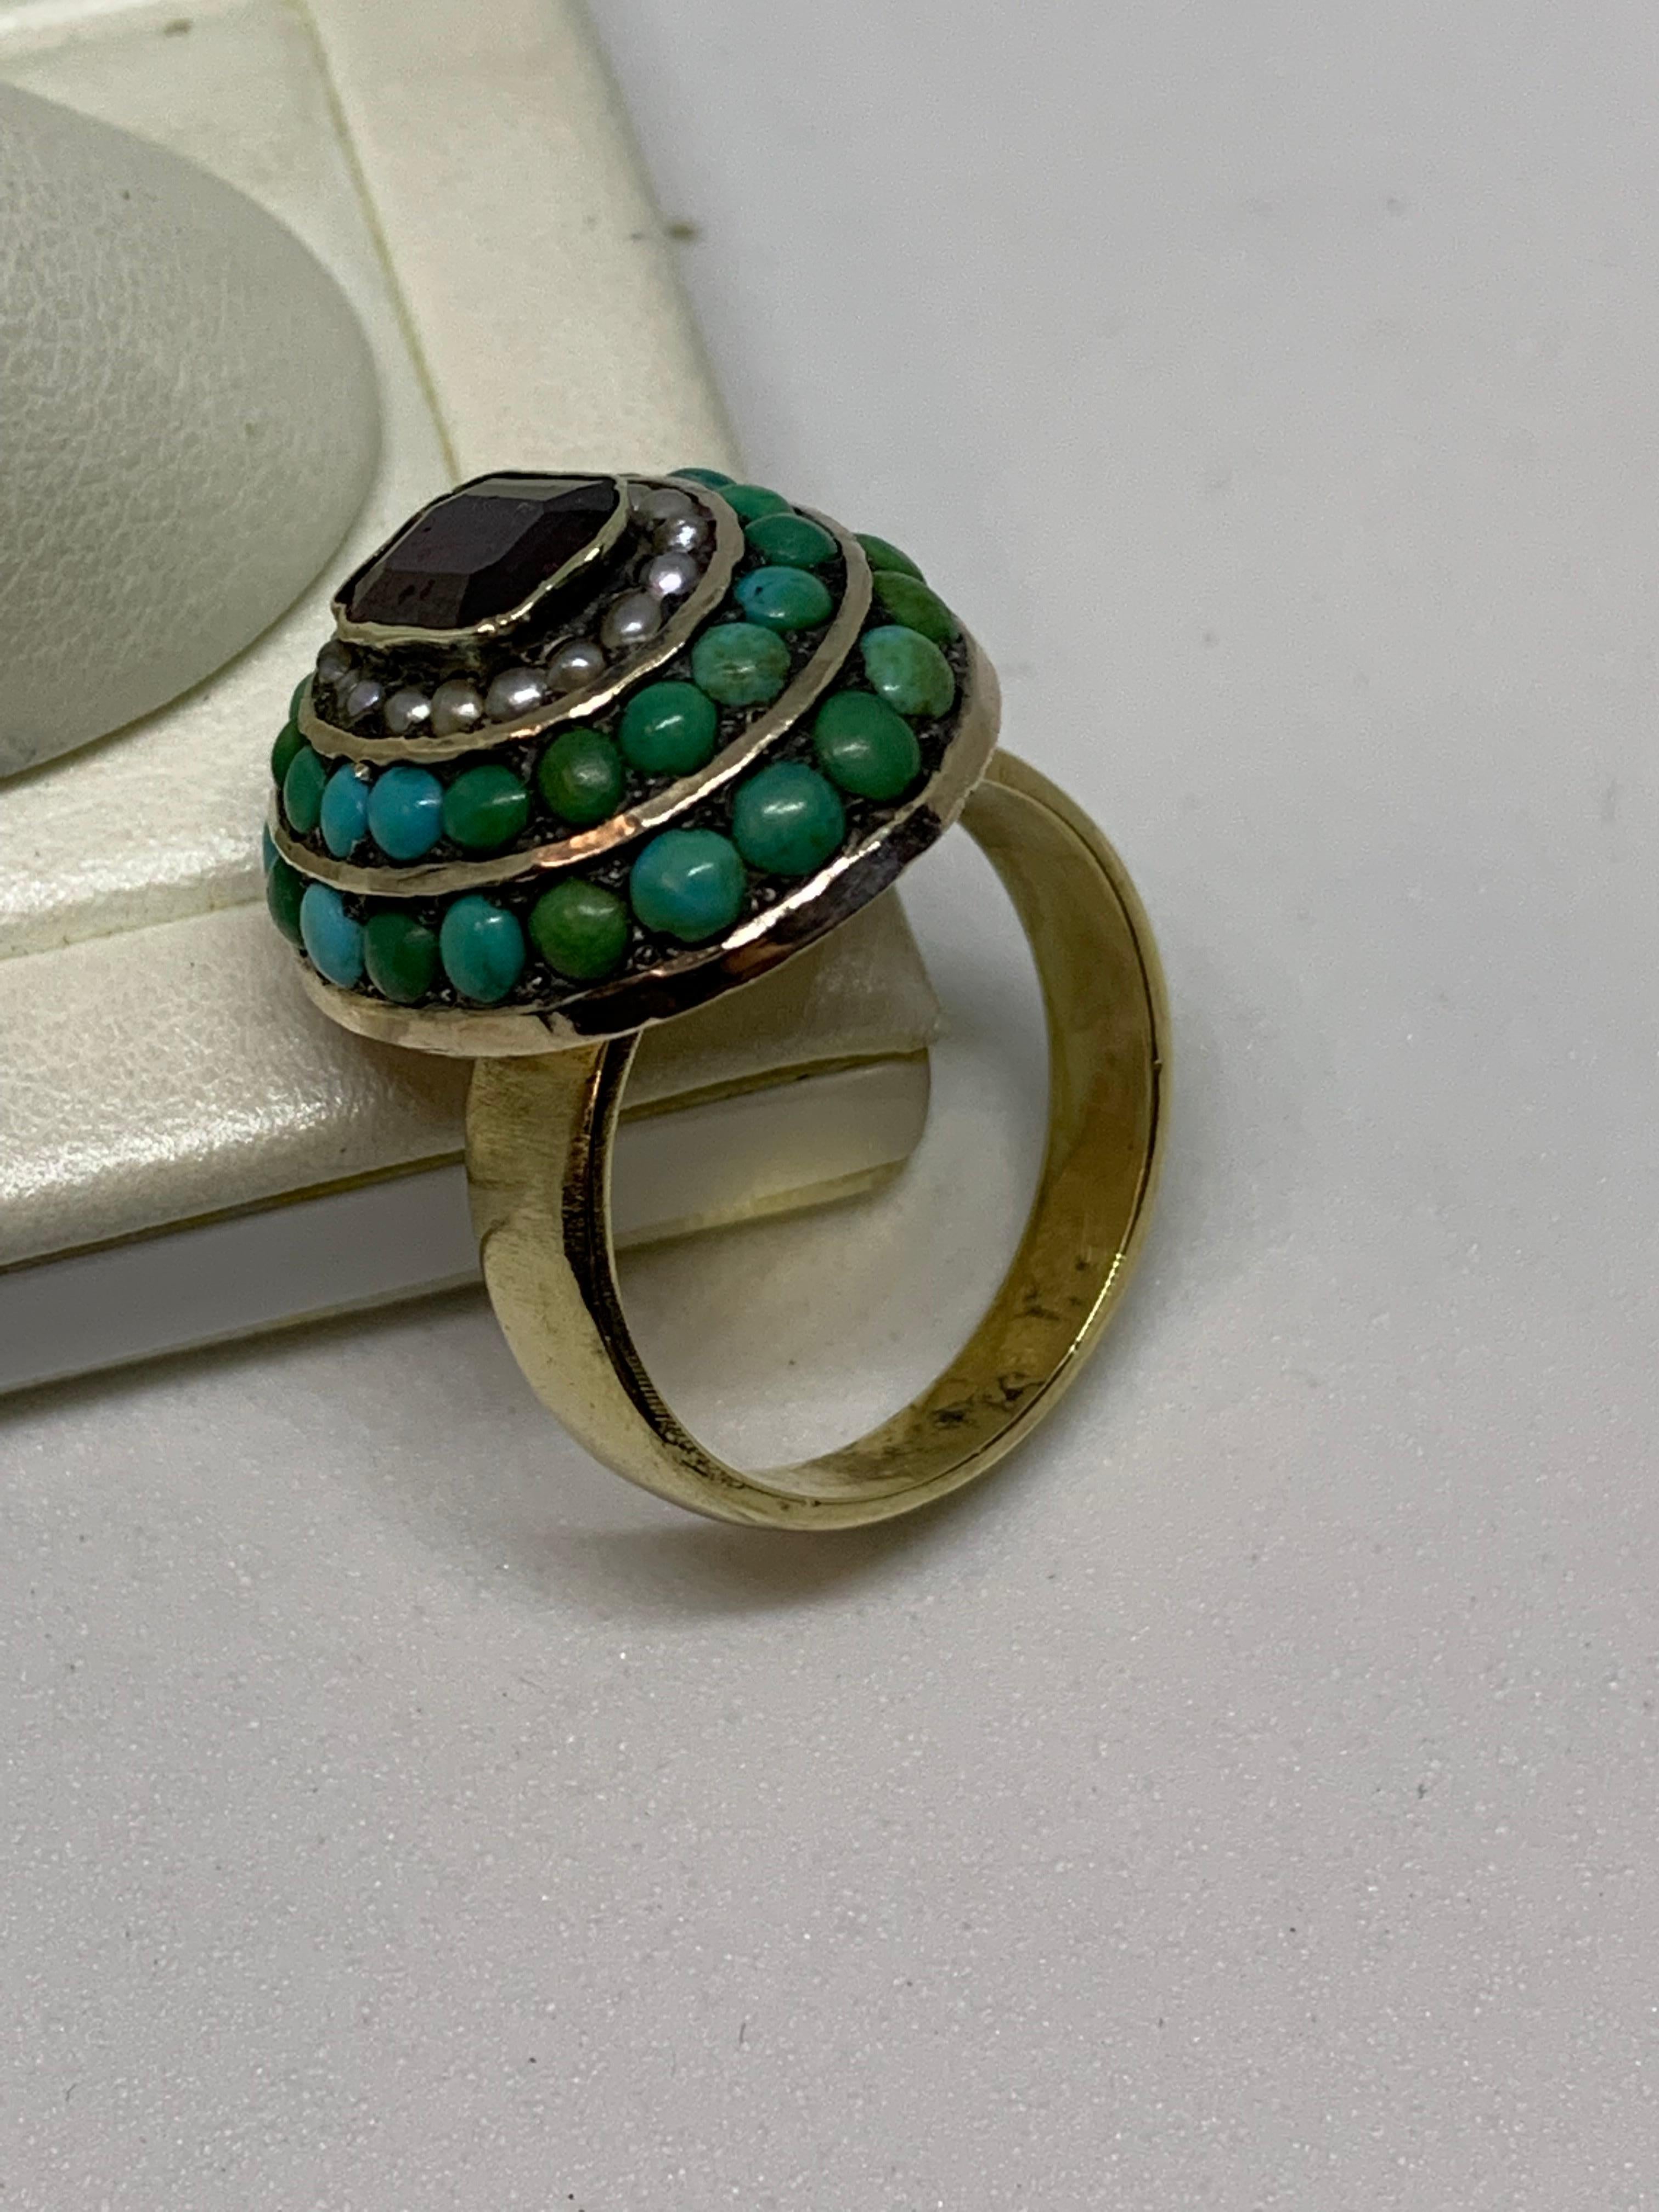 Beautiful Estate Ring with 